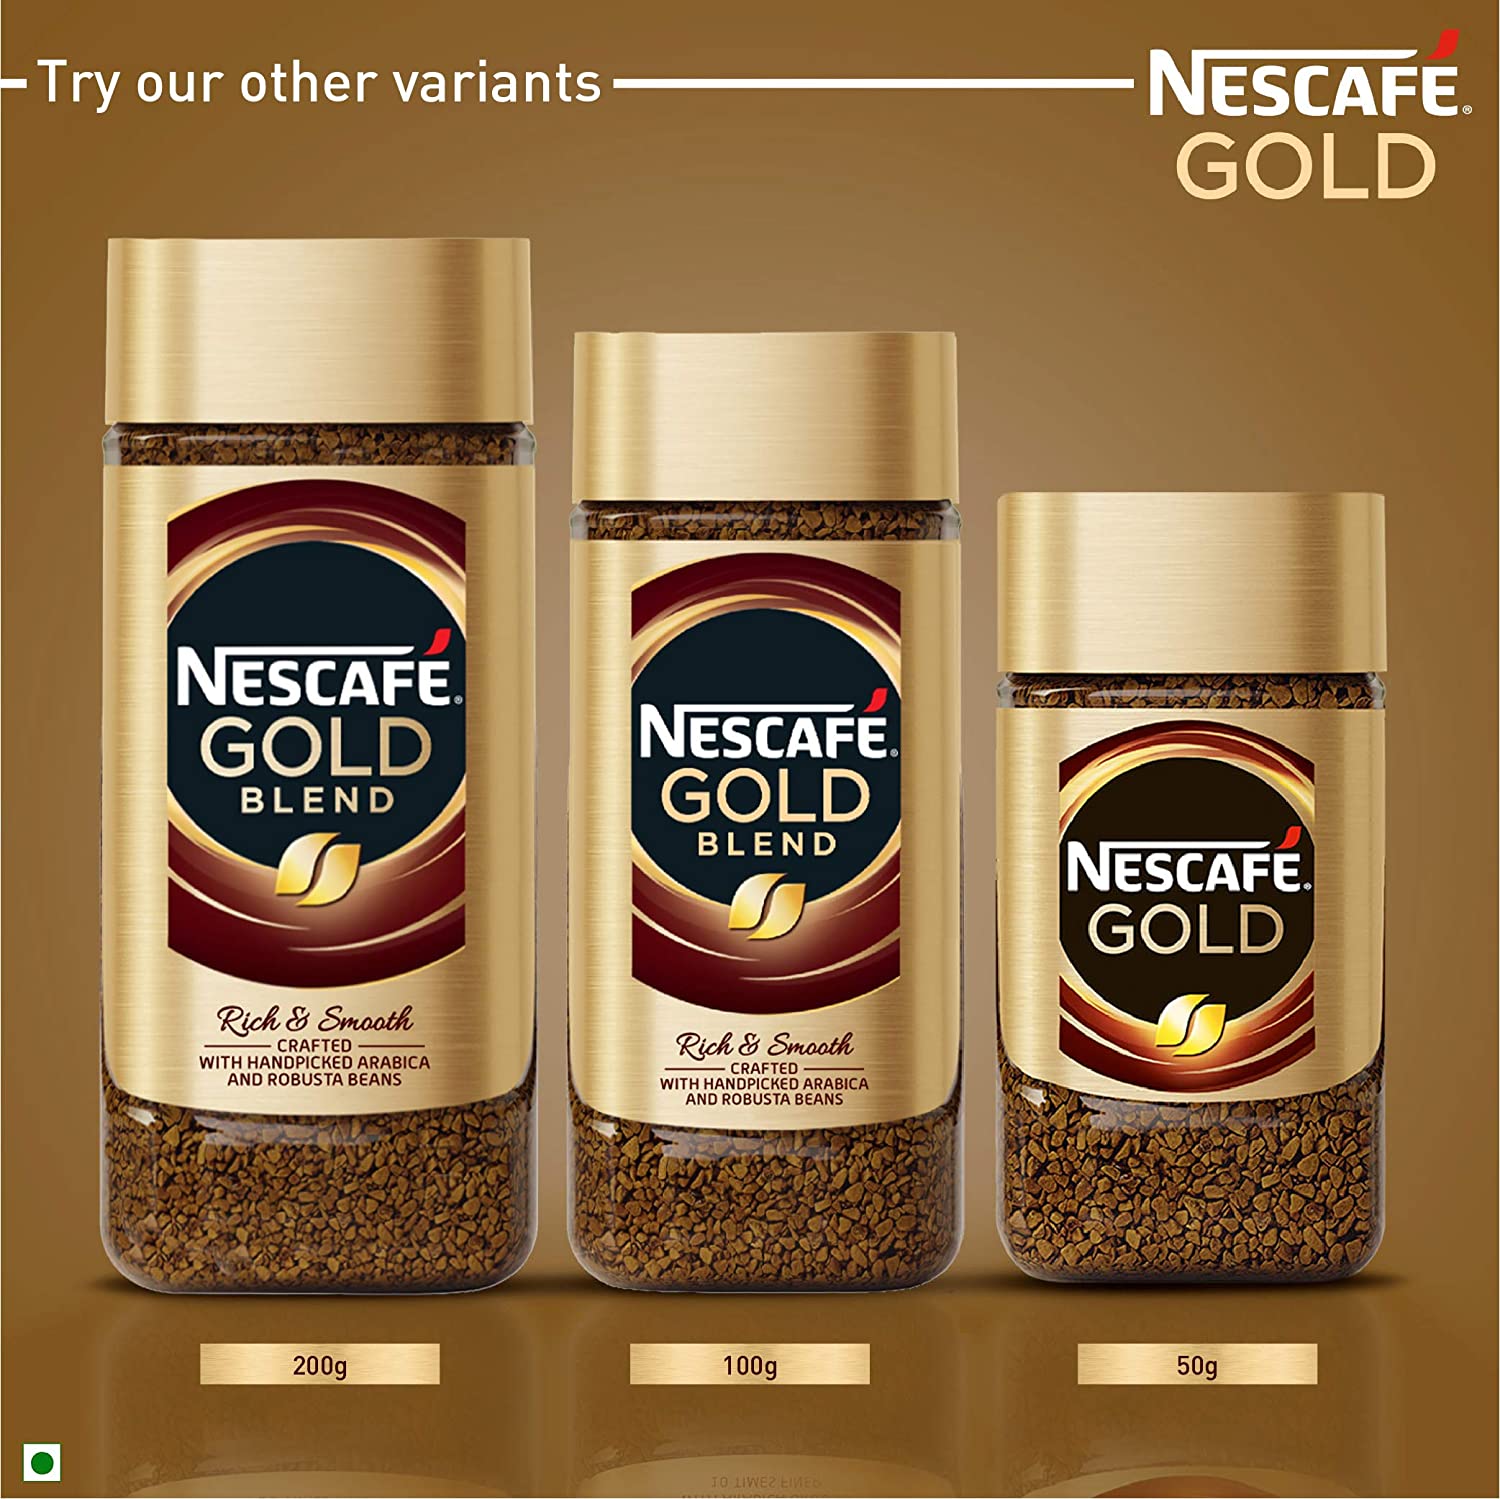 NESCAFÉ Gold Blend Rich & Smooth Soluble Instant Coffee Powder